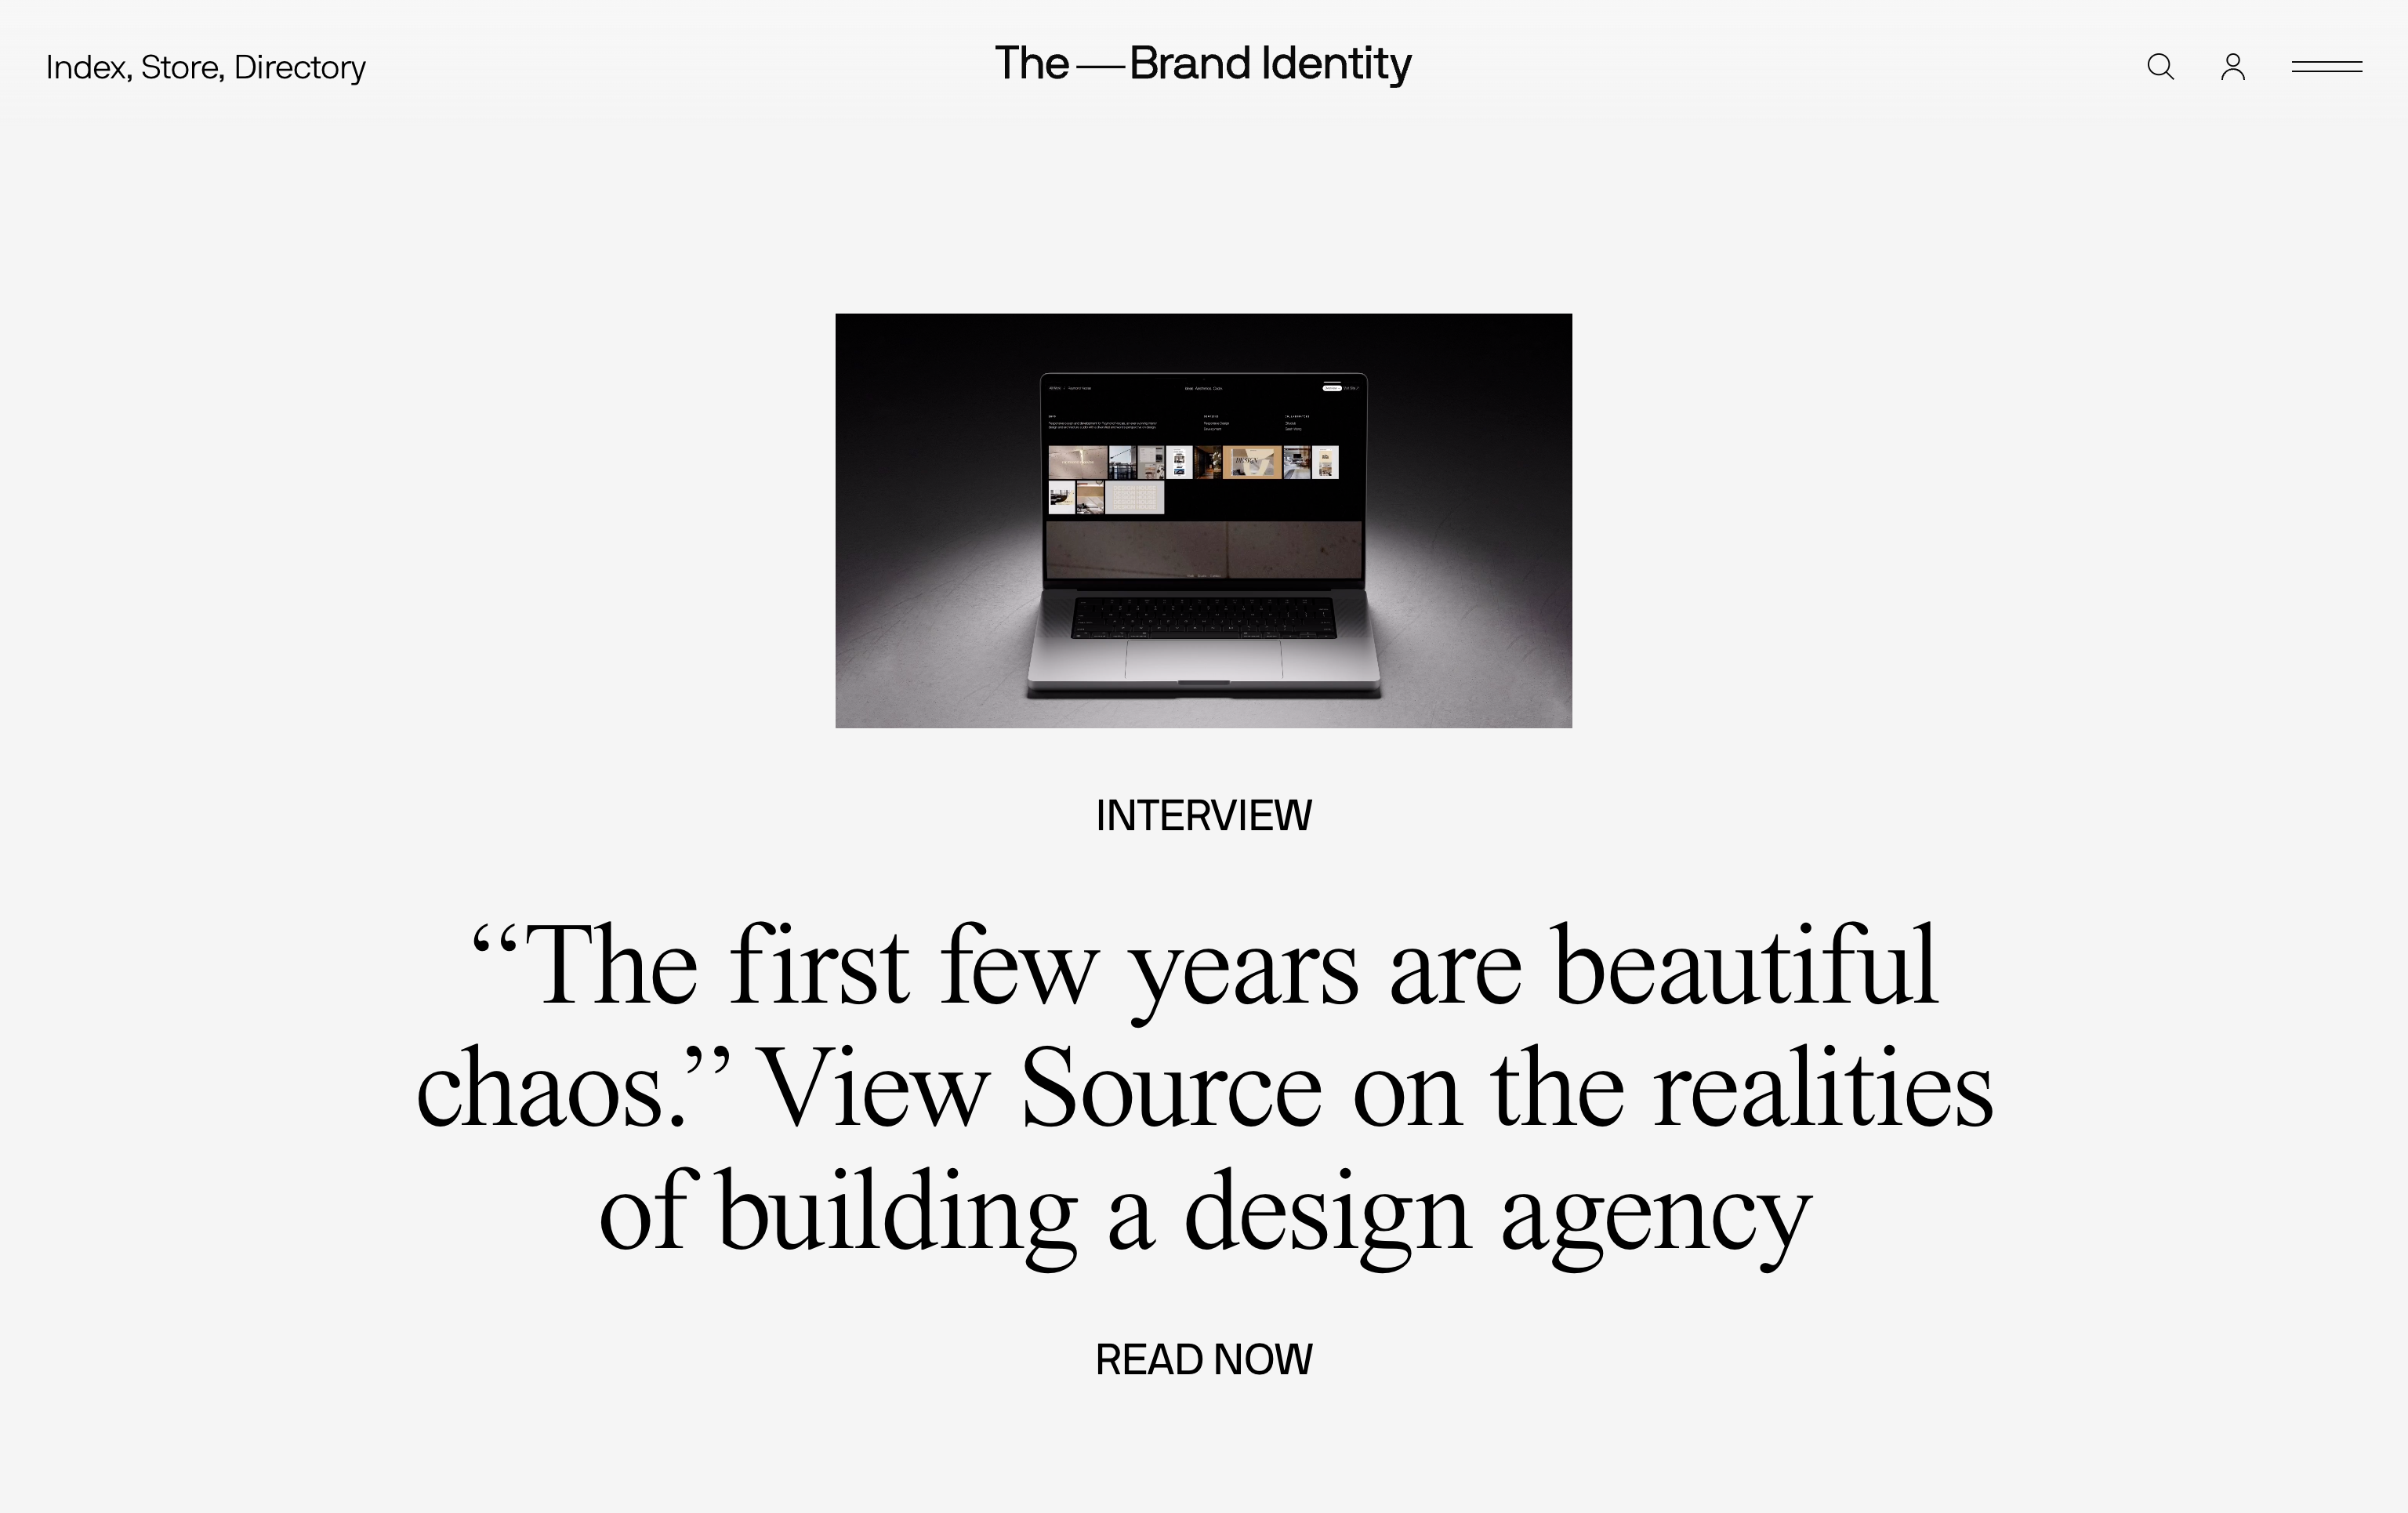 View Source interview on The Brand Identity